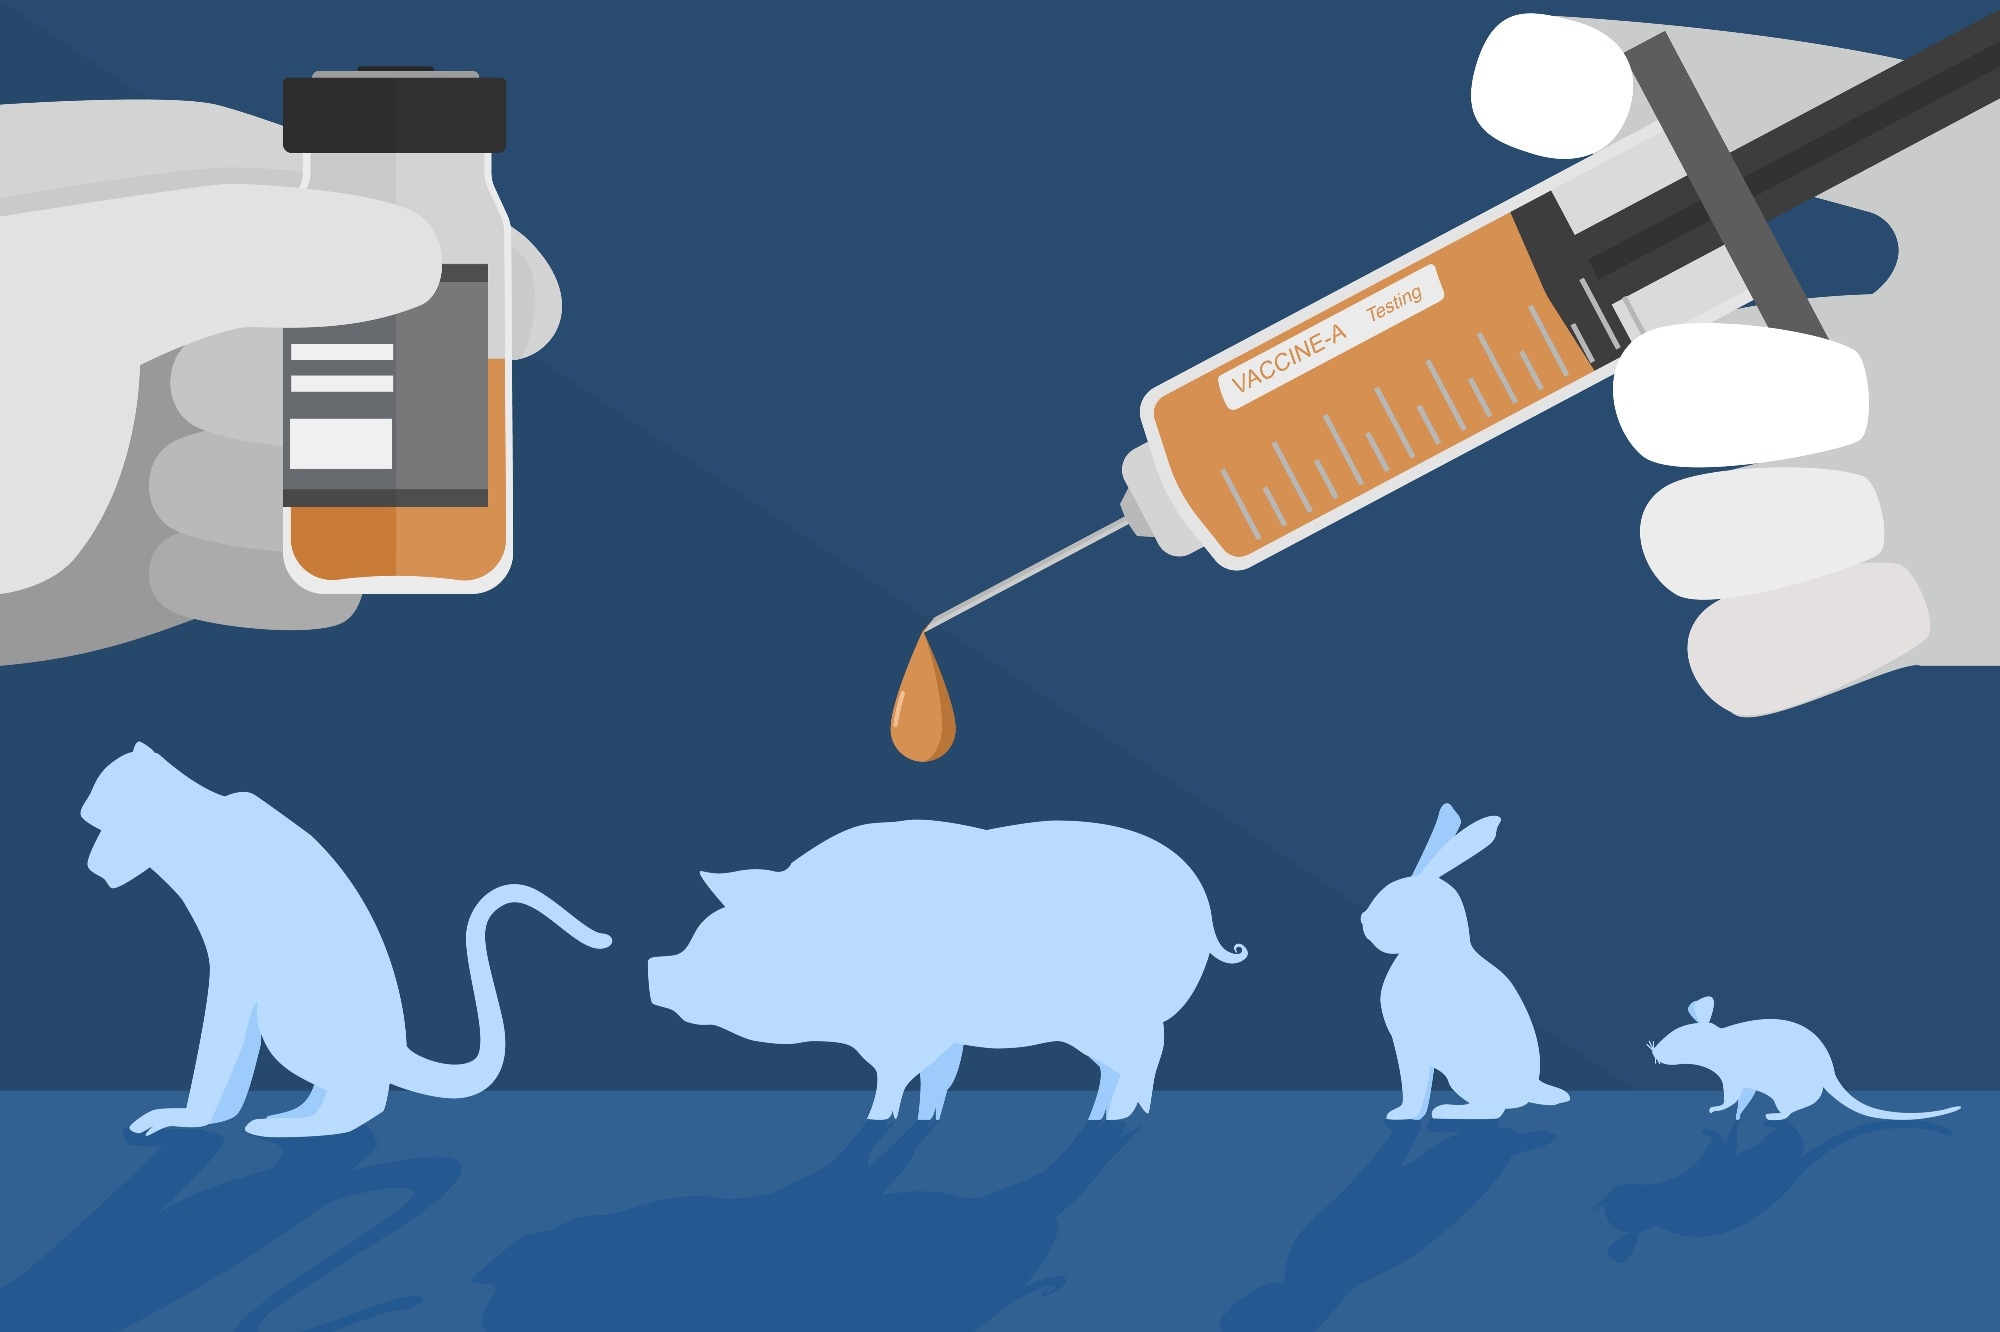 medical research on animals